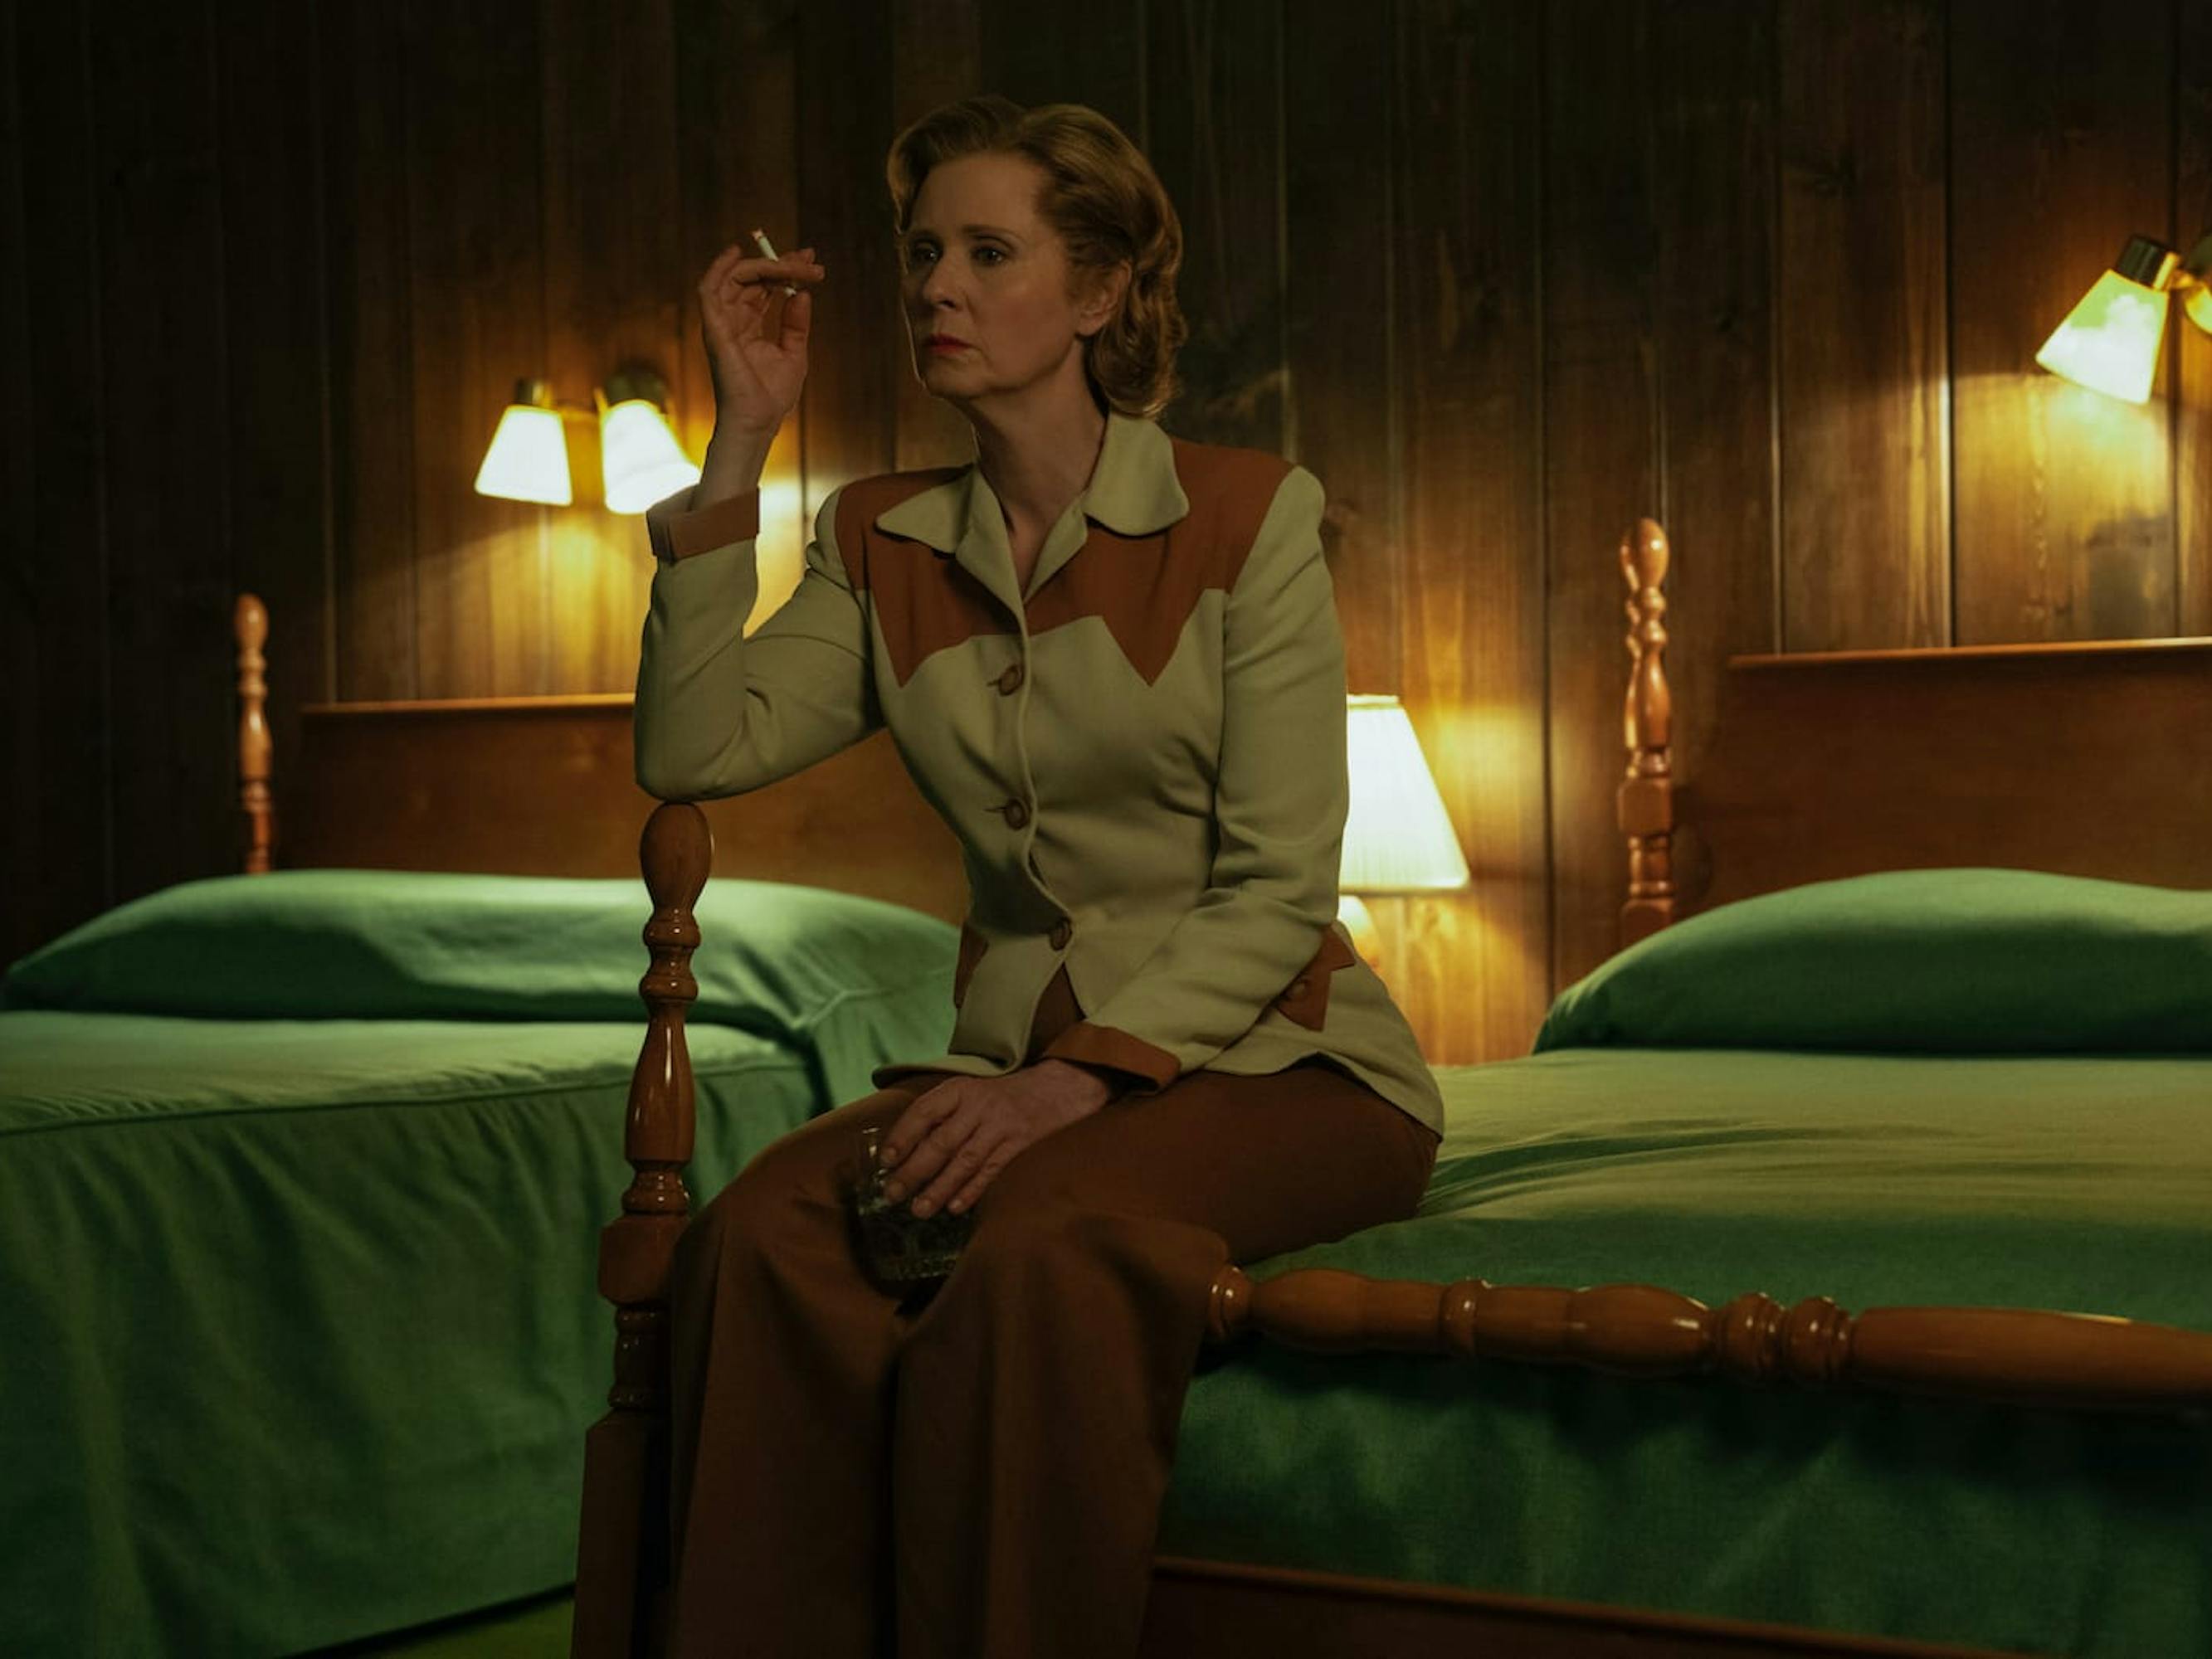 Gwendolyn Briggs sits on a four poster bed smoking a cigarette and drinking out of a glass. The sheets are green, and the room is lit by 5 bright lamps. She looks stressed although her chic western outfit says otherwise.